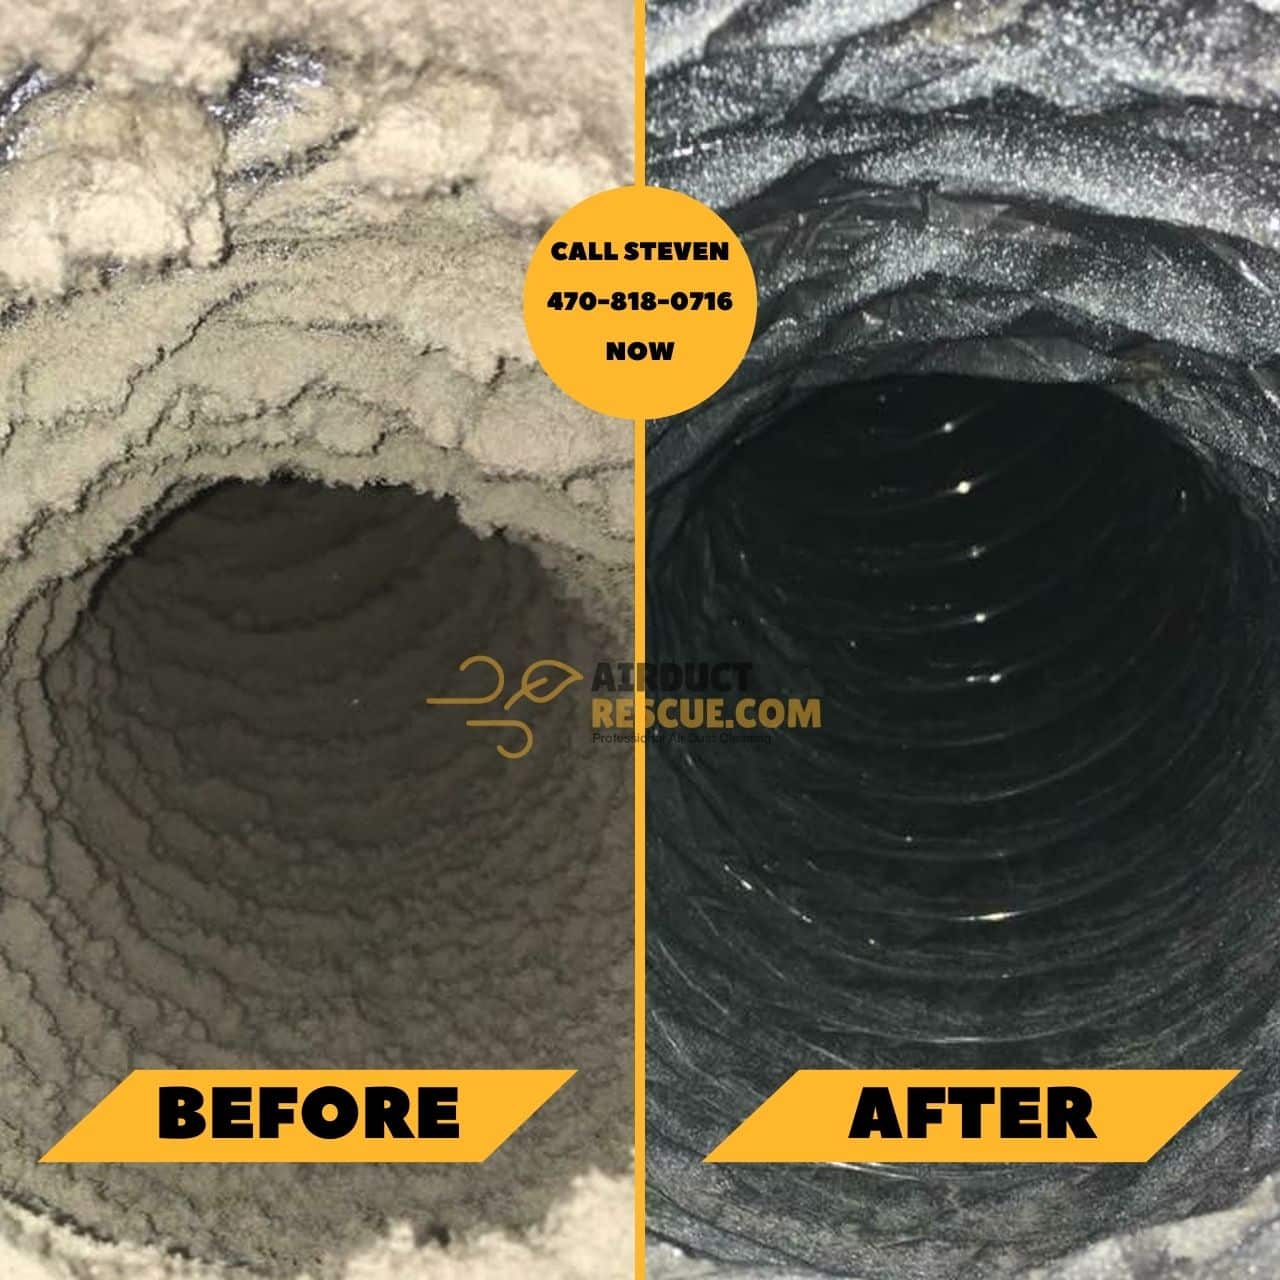 air duct & dryer vent cleaning in sandy springs, ga